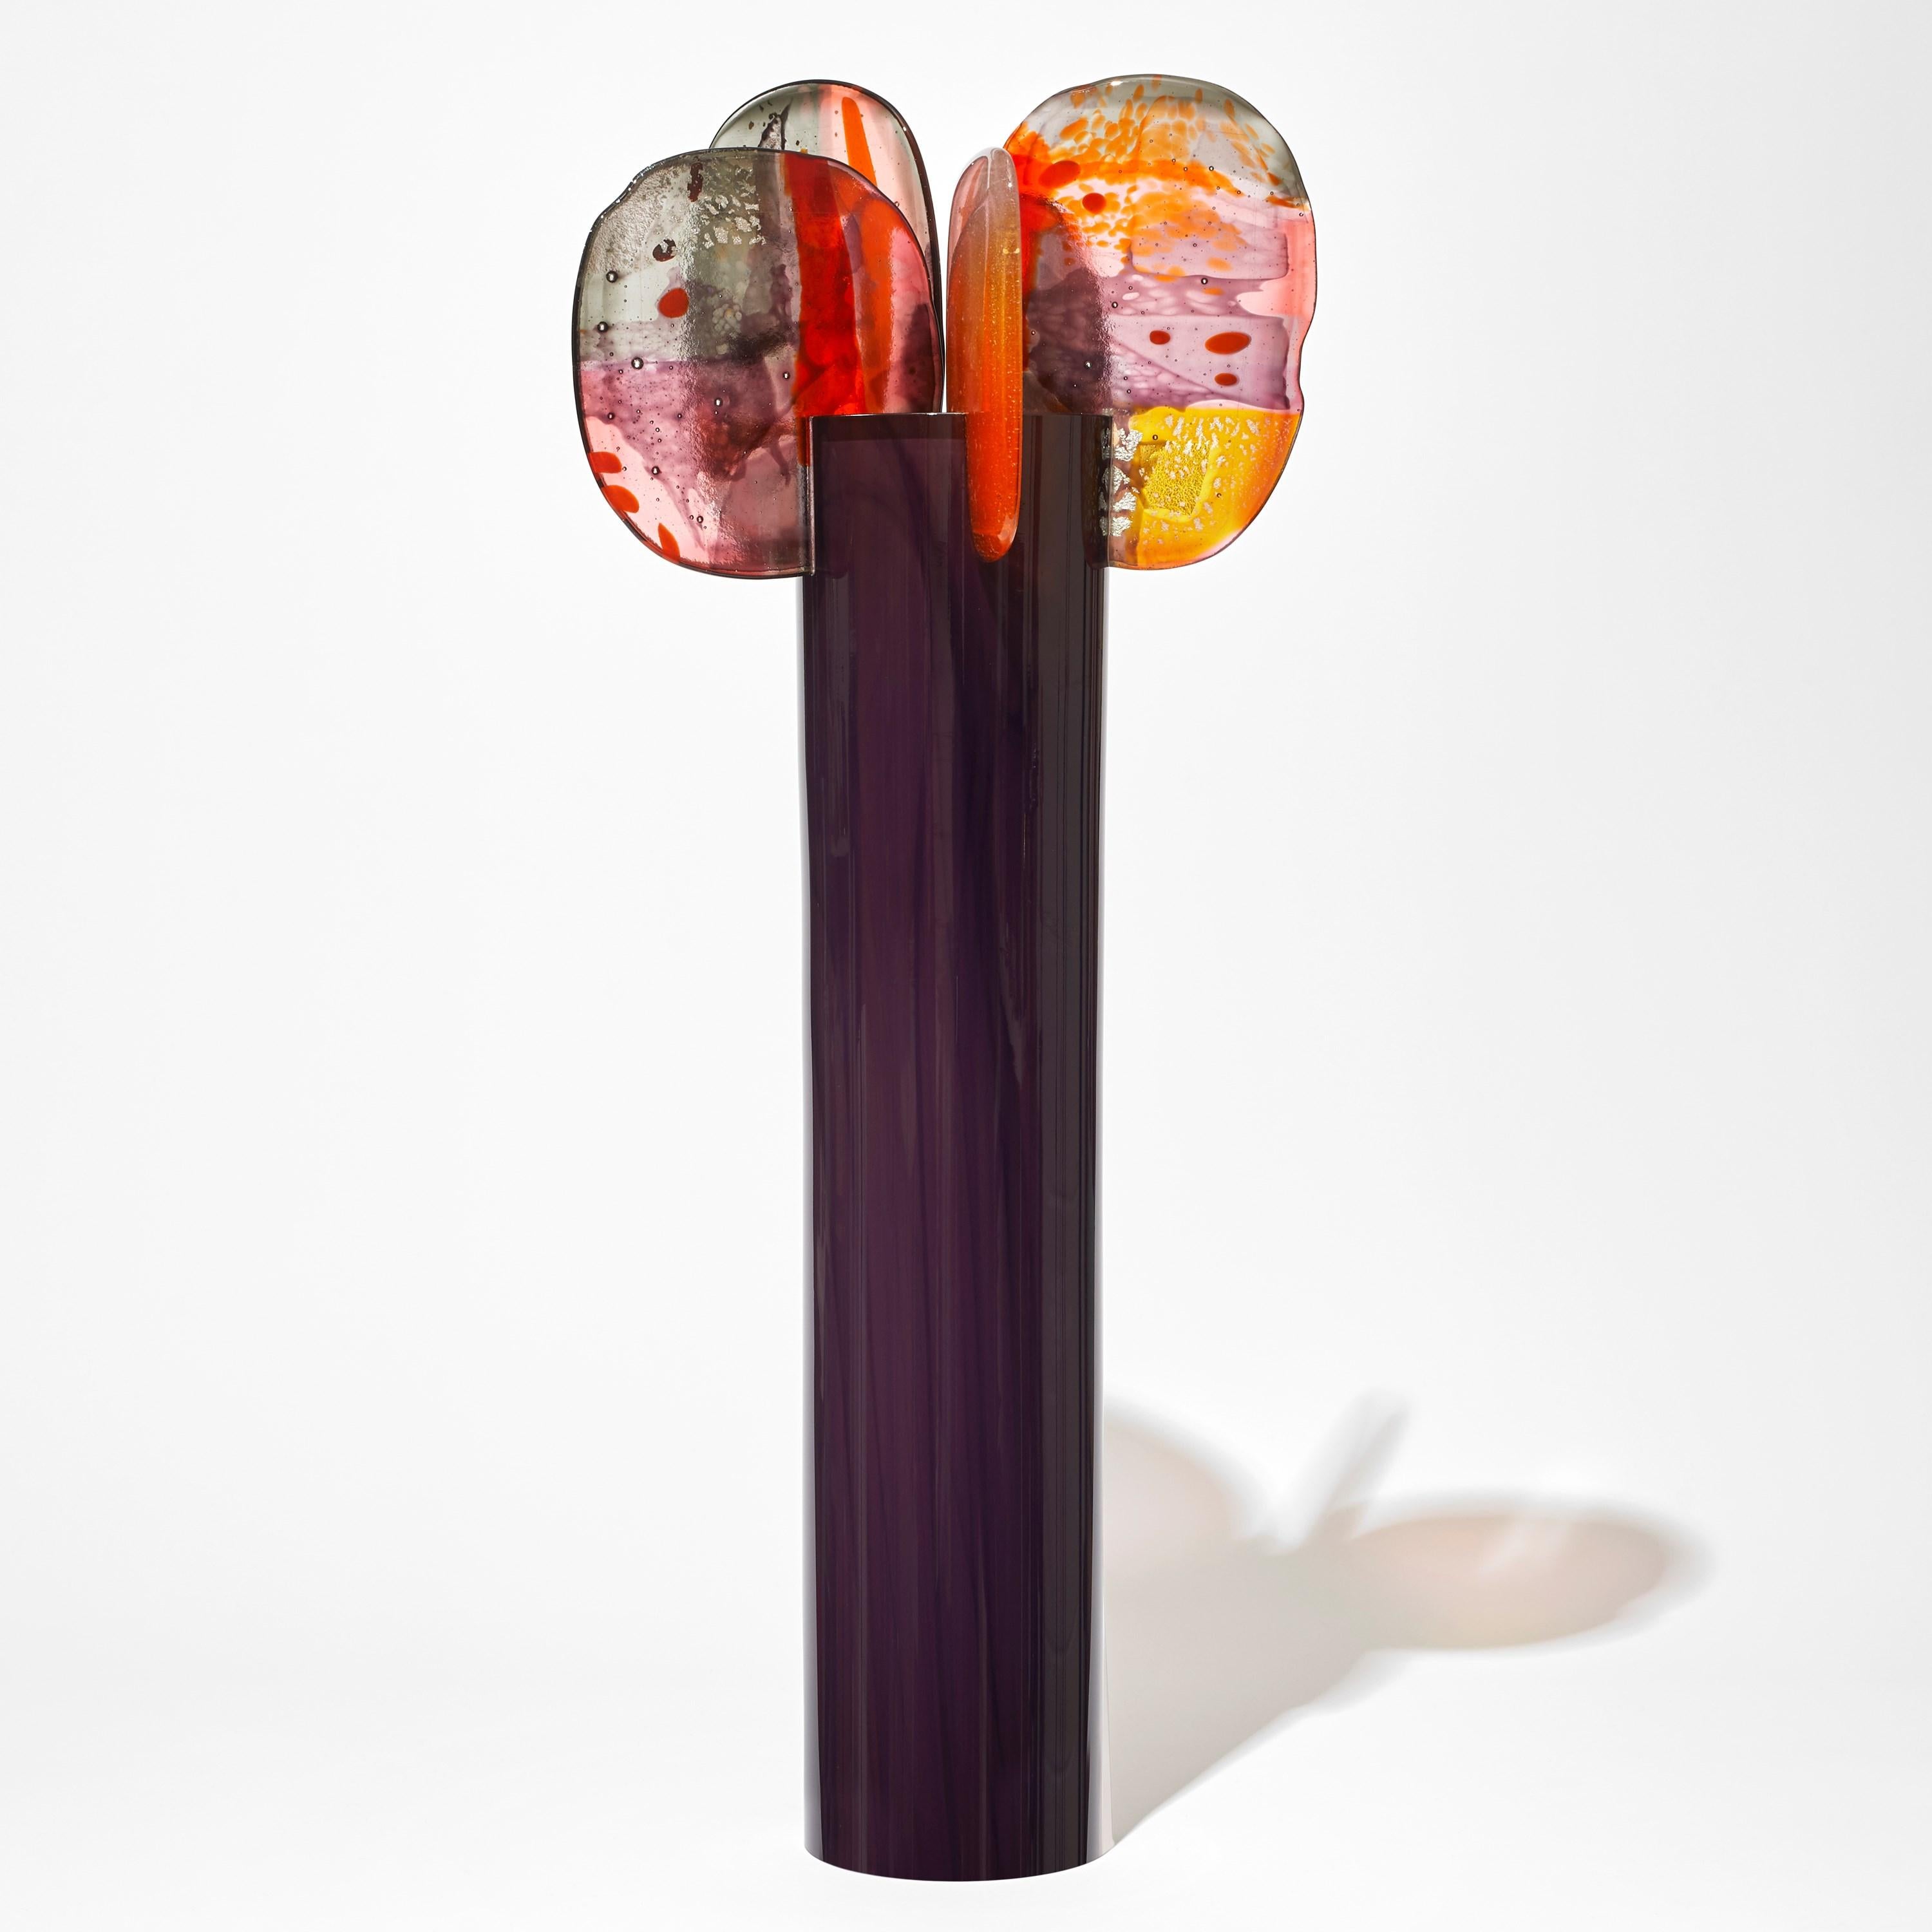 'Paradise 02 in Stapelia' is a unique glass sculpture created using hybrid hand-made glass techniques by the British artist Amy Cushing. Combining mouth blown glass with kiln formed glass, each piece within the collection displays a multiple of